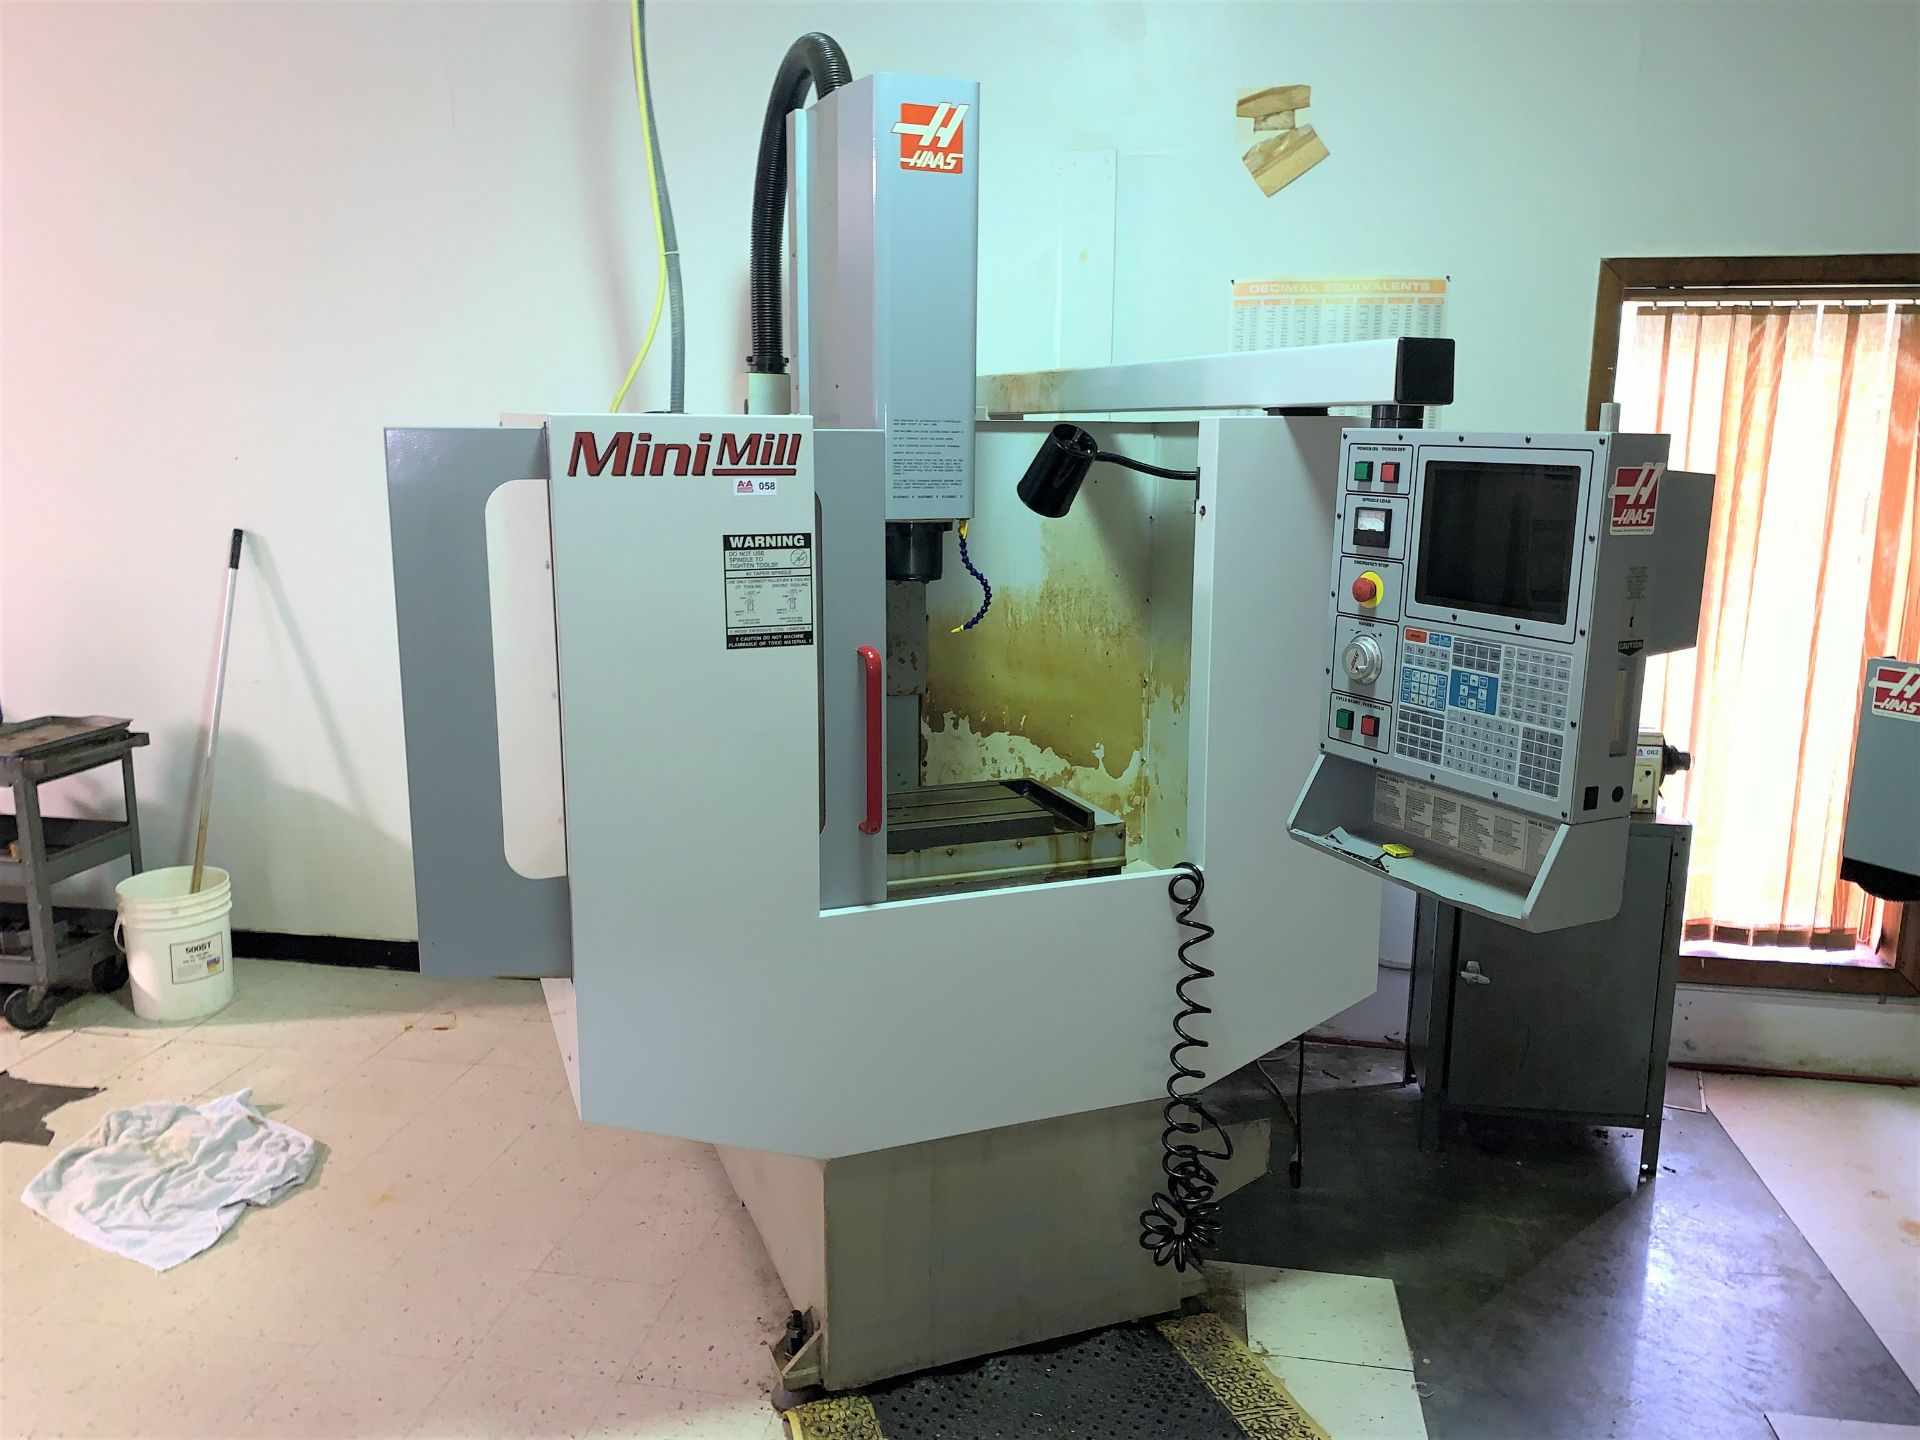 2000 - HAAS Mini-Mill CNC Vertical Milling Machine - Image 2 of 8